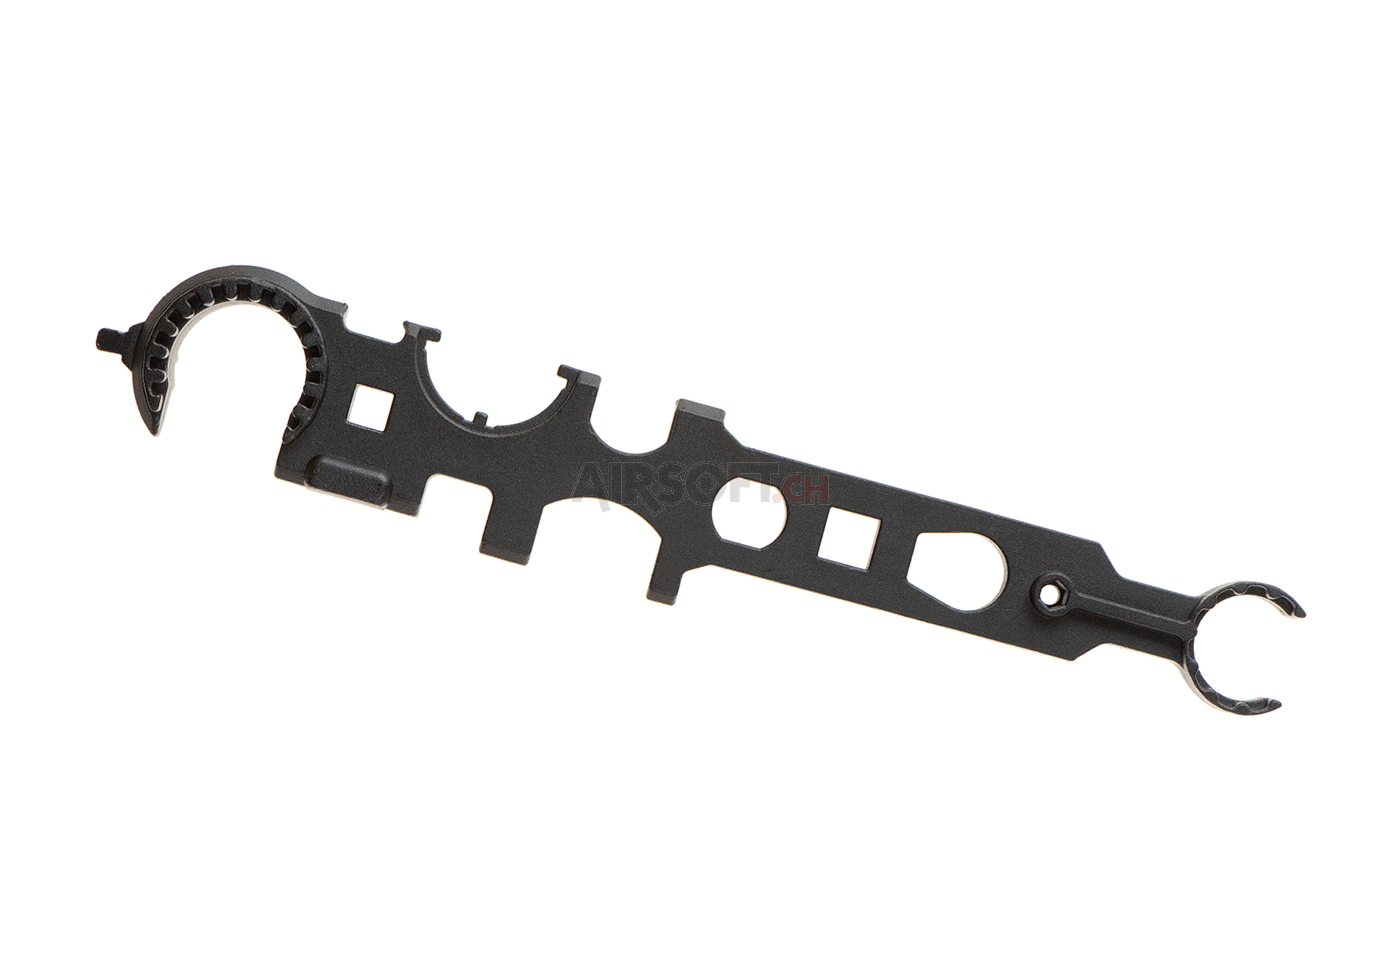 WADSN Multi-Functional Steel Wrench Tool